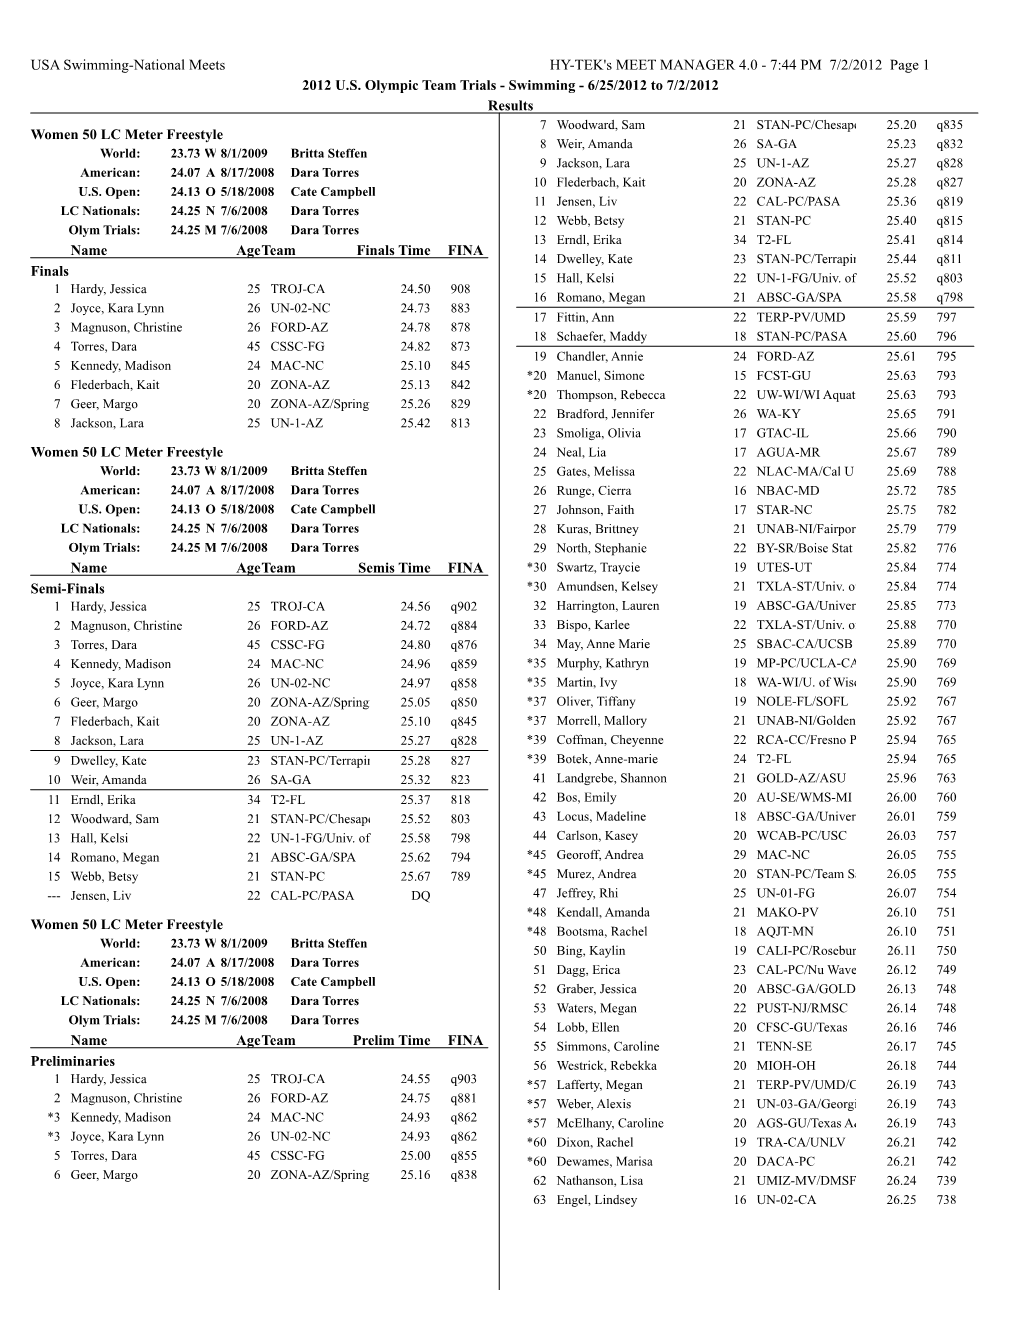 7:44 PM 7/2/2012 Page 1 2012 US Olympic Team Trials